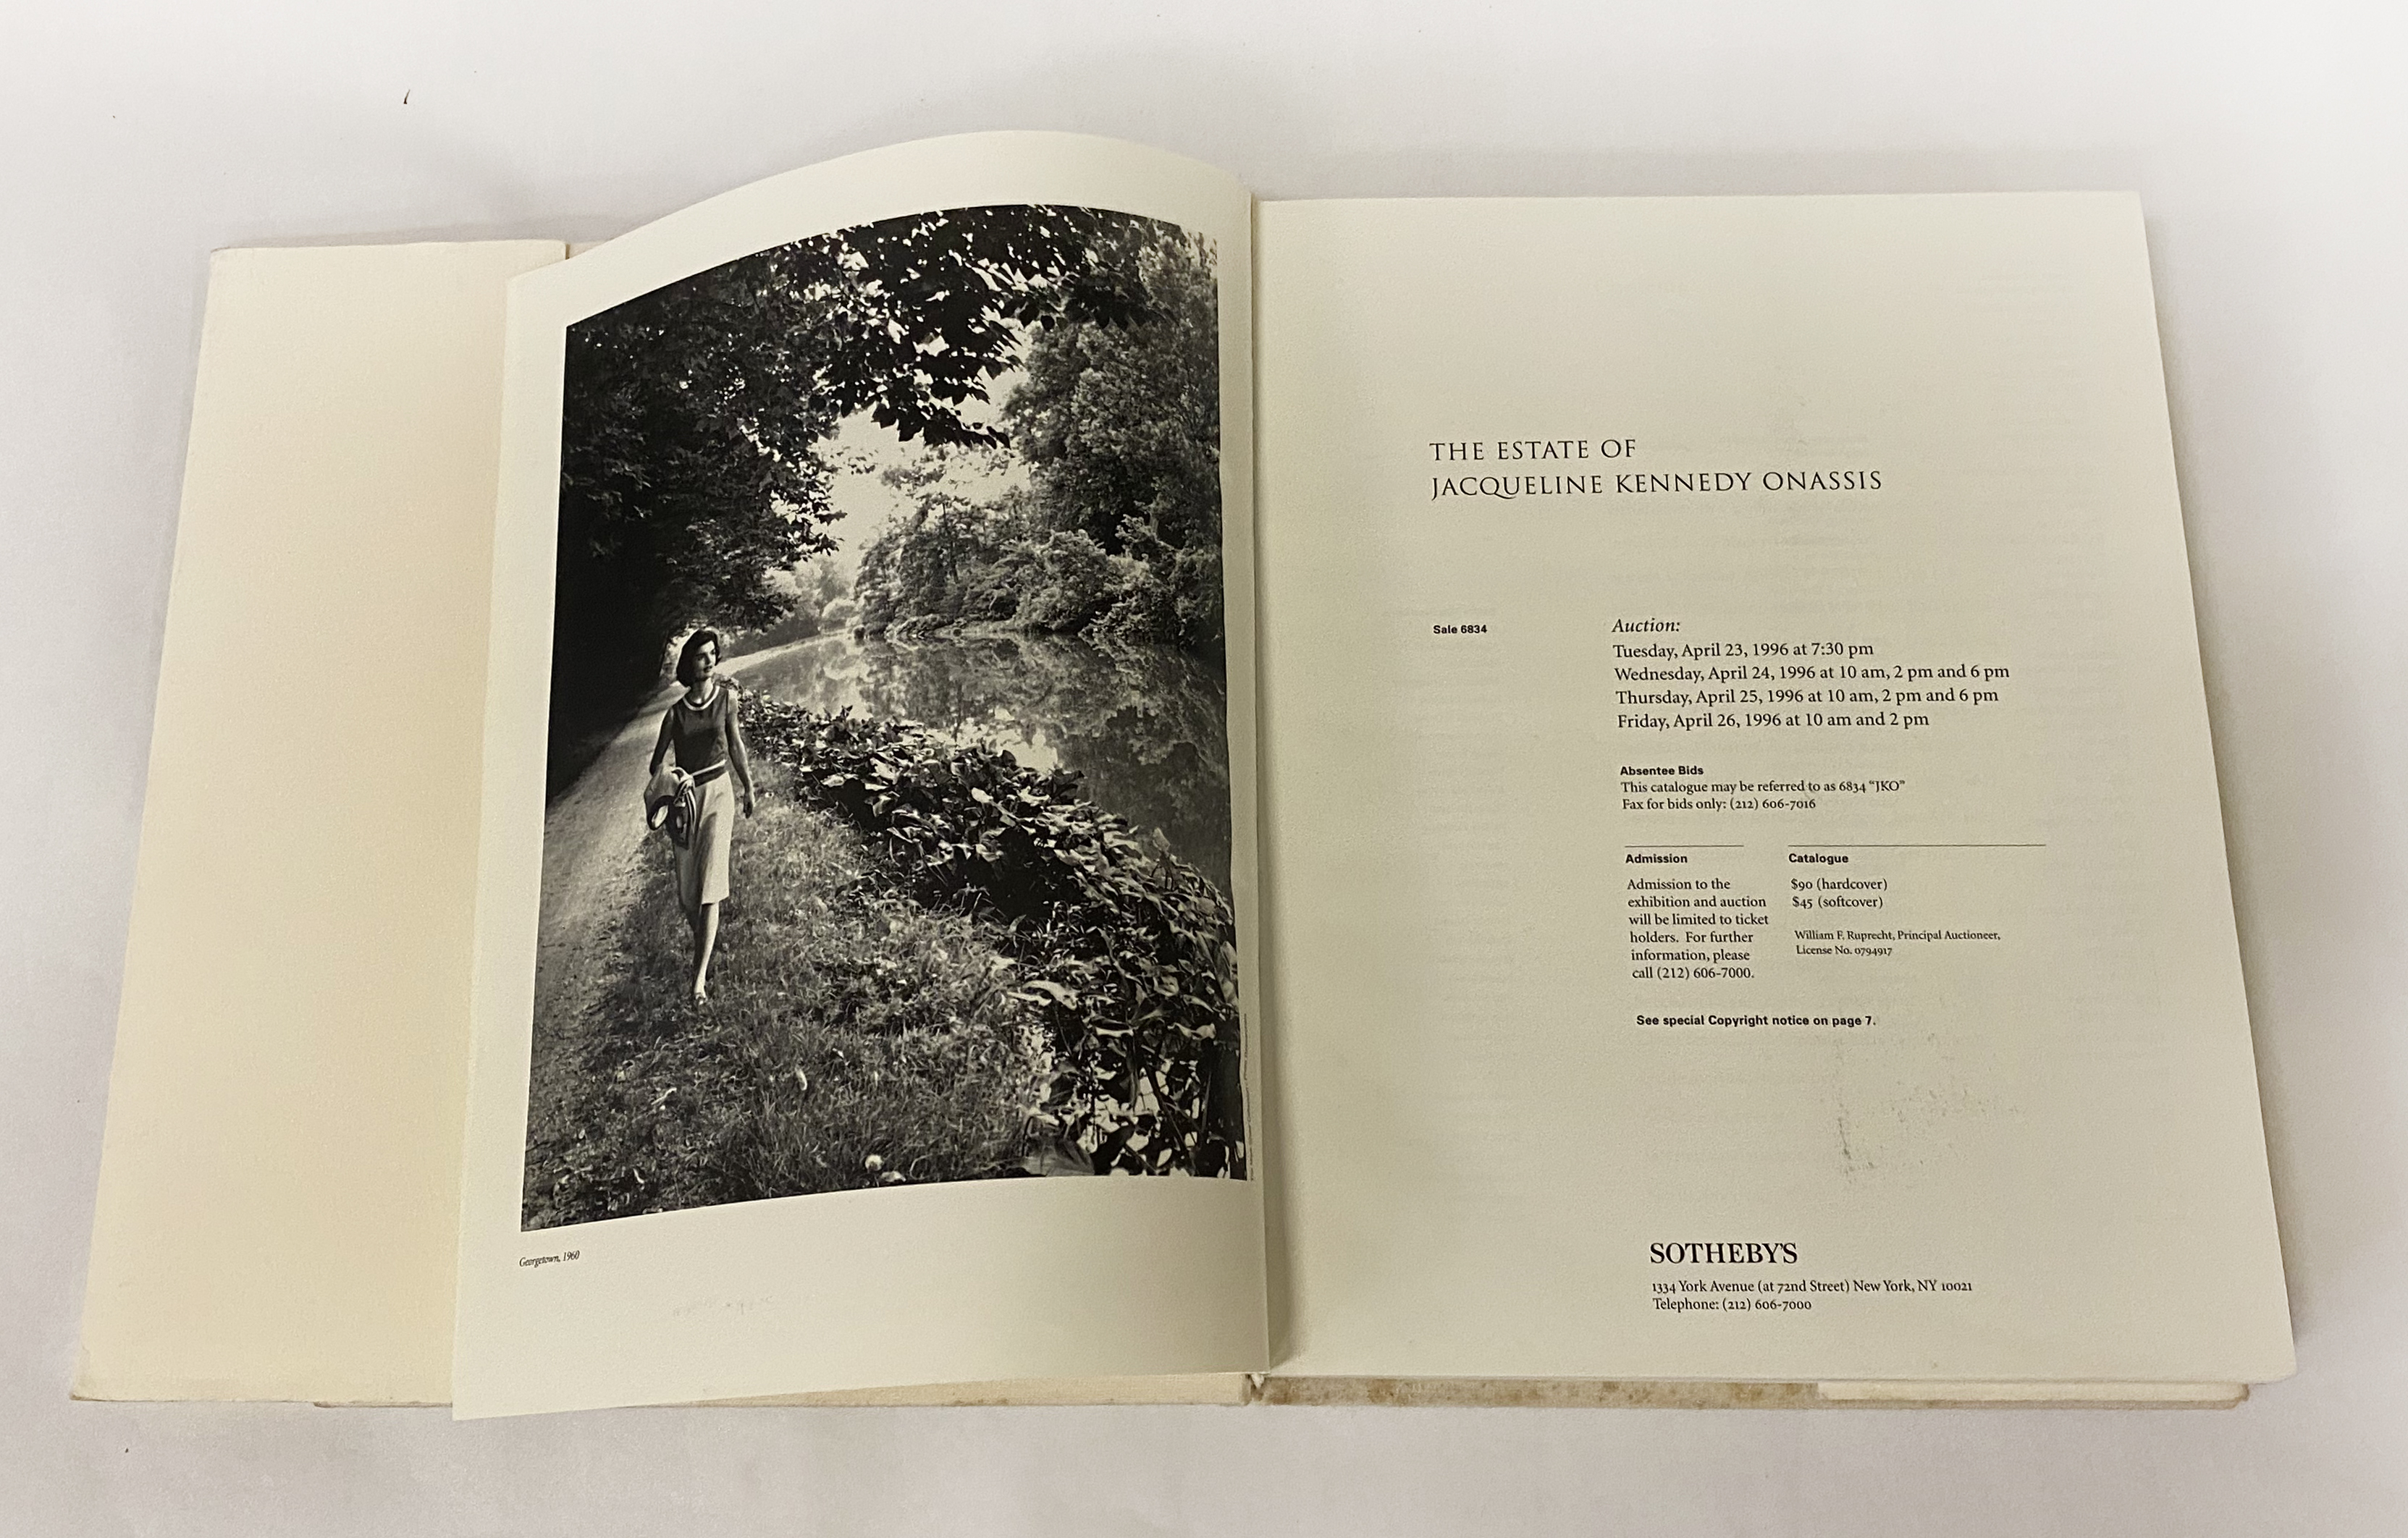 SOTHEBYS HARD BACK BOOK OF THE ESTATE JACQUELINE KENNEDY WITH DUST COVER